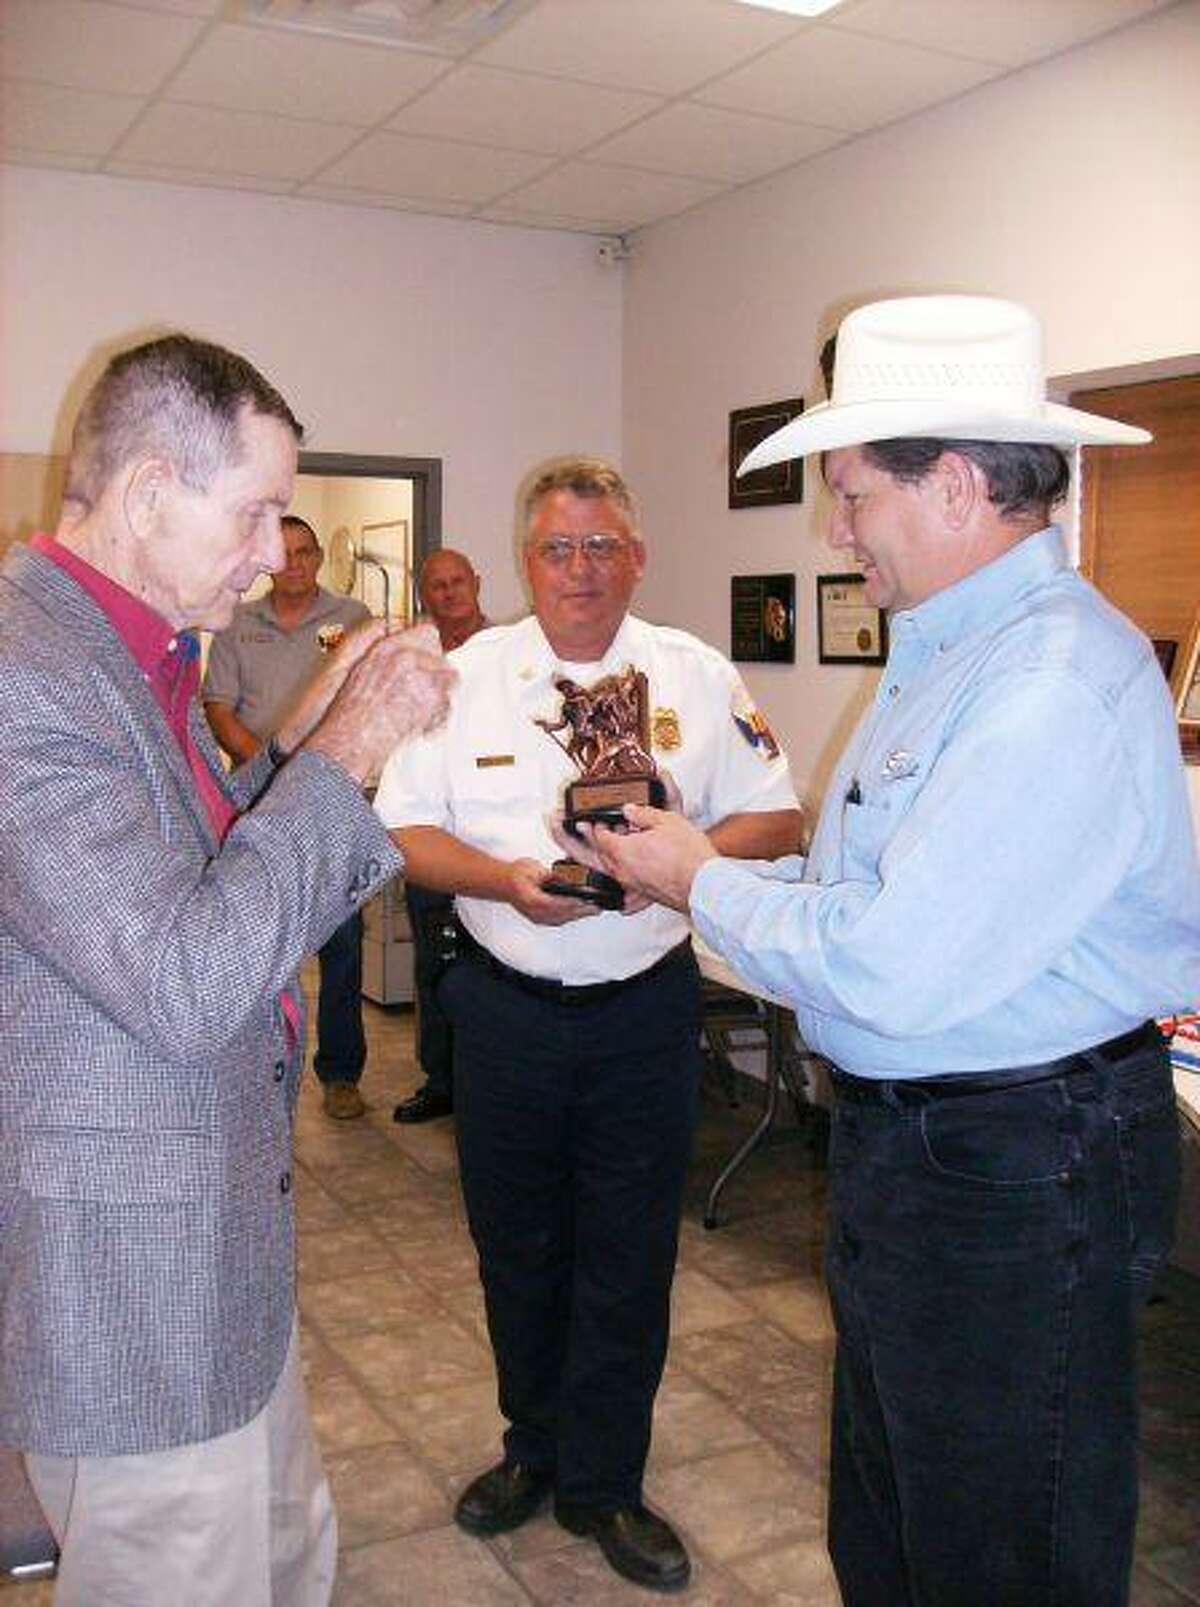 Crash survivor Bill Philpot, 70, of the Grangerland area, presents Perry Orrick, 45, with a New Caney Fire District Lifesaver award at an Aug. 26 ceremony attended by family and friends at the New Caney Fire Department.